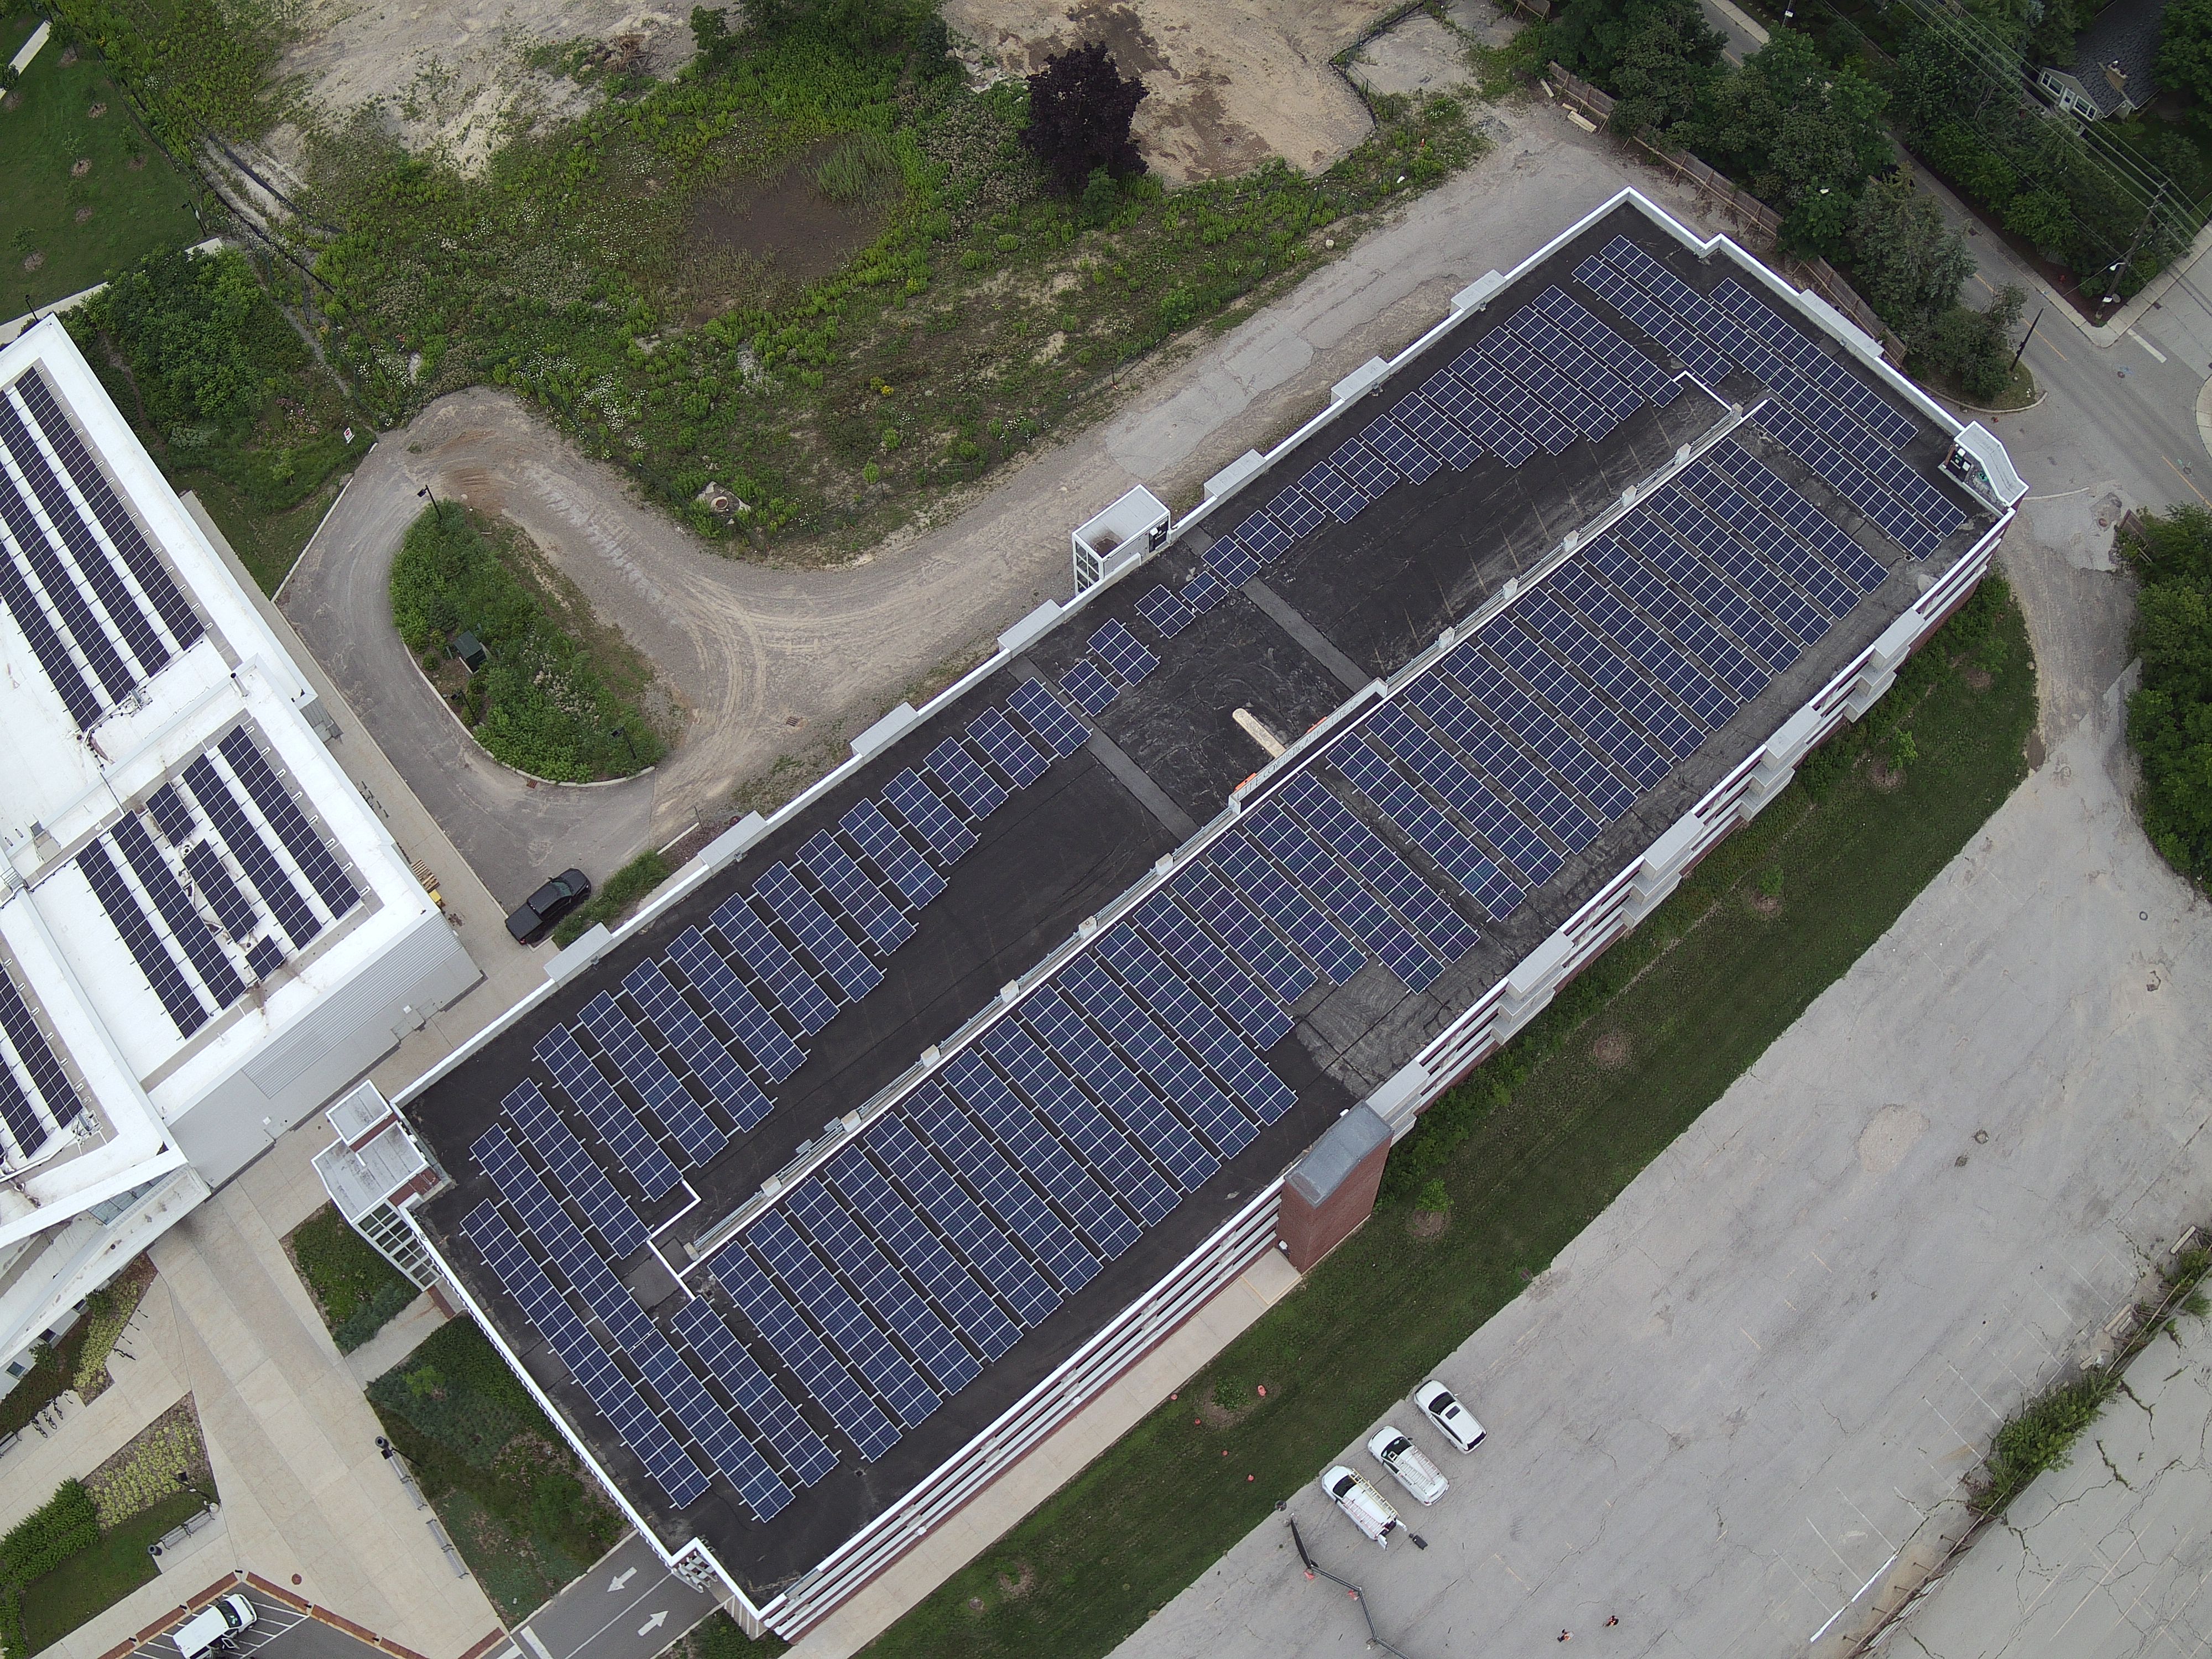 Overhead view of Oakville Trafalgar Communty Centre parking garage | Once solar panels are installed on the garage roof, it will look something like this. | Town of Oakville